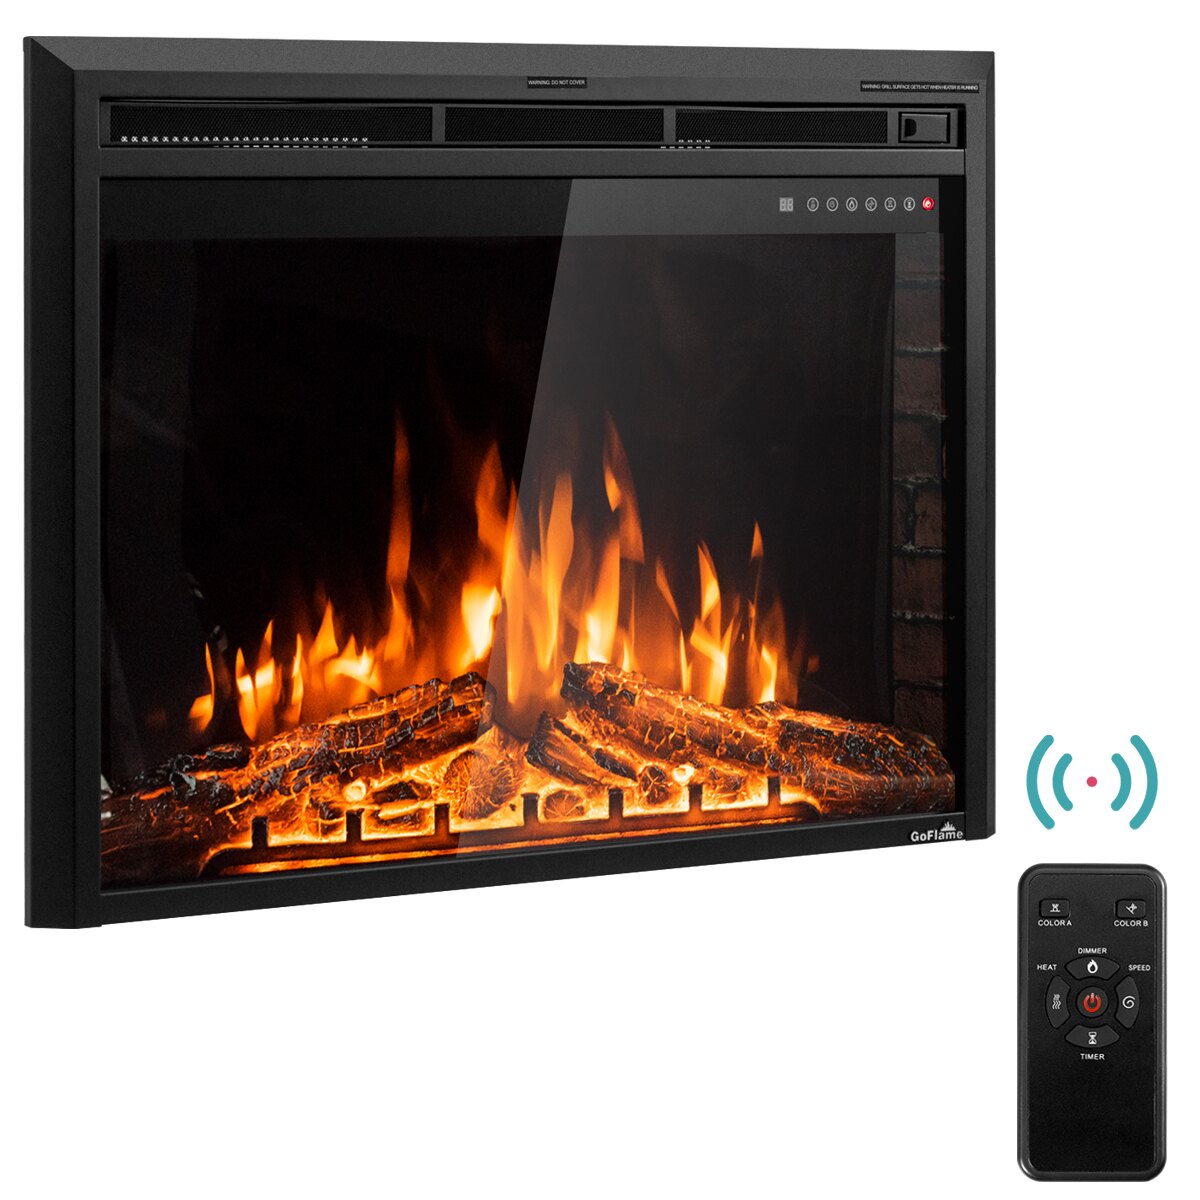 Wall Mount Electric Fireplace Insert Lovely Goflame 36 750w 1500w Fireplace Heater Electric Embedded Insert Timer Flame Remote